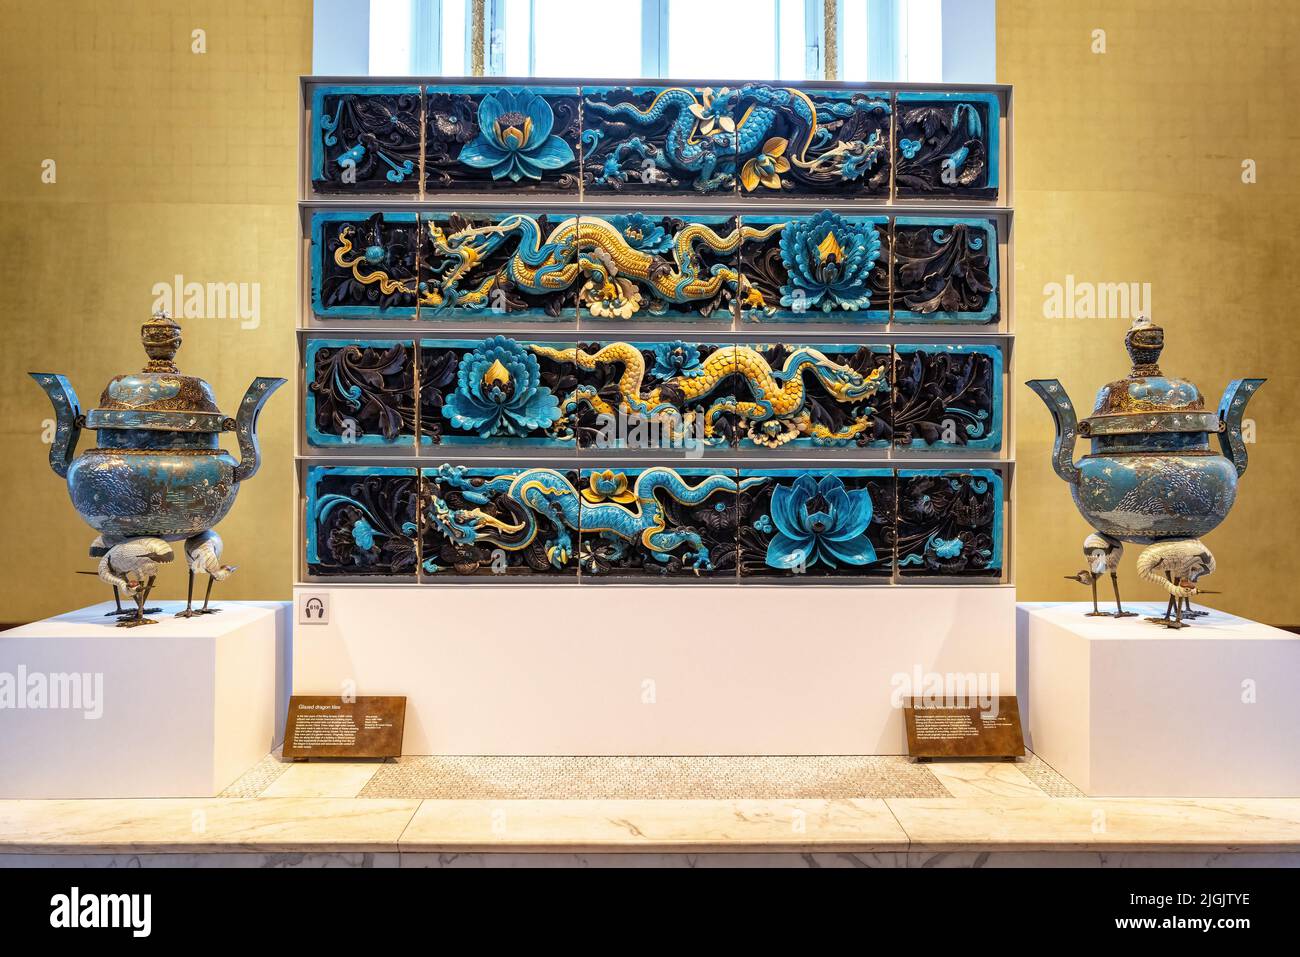 London, UK - 18th April 2022: Ming Dynasty glazed ceramic dragon tiles, dating from 15th to 16th century China, and two Cloisonne incense burners, Bri Stock Photo